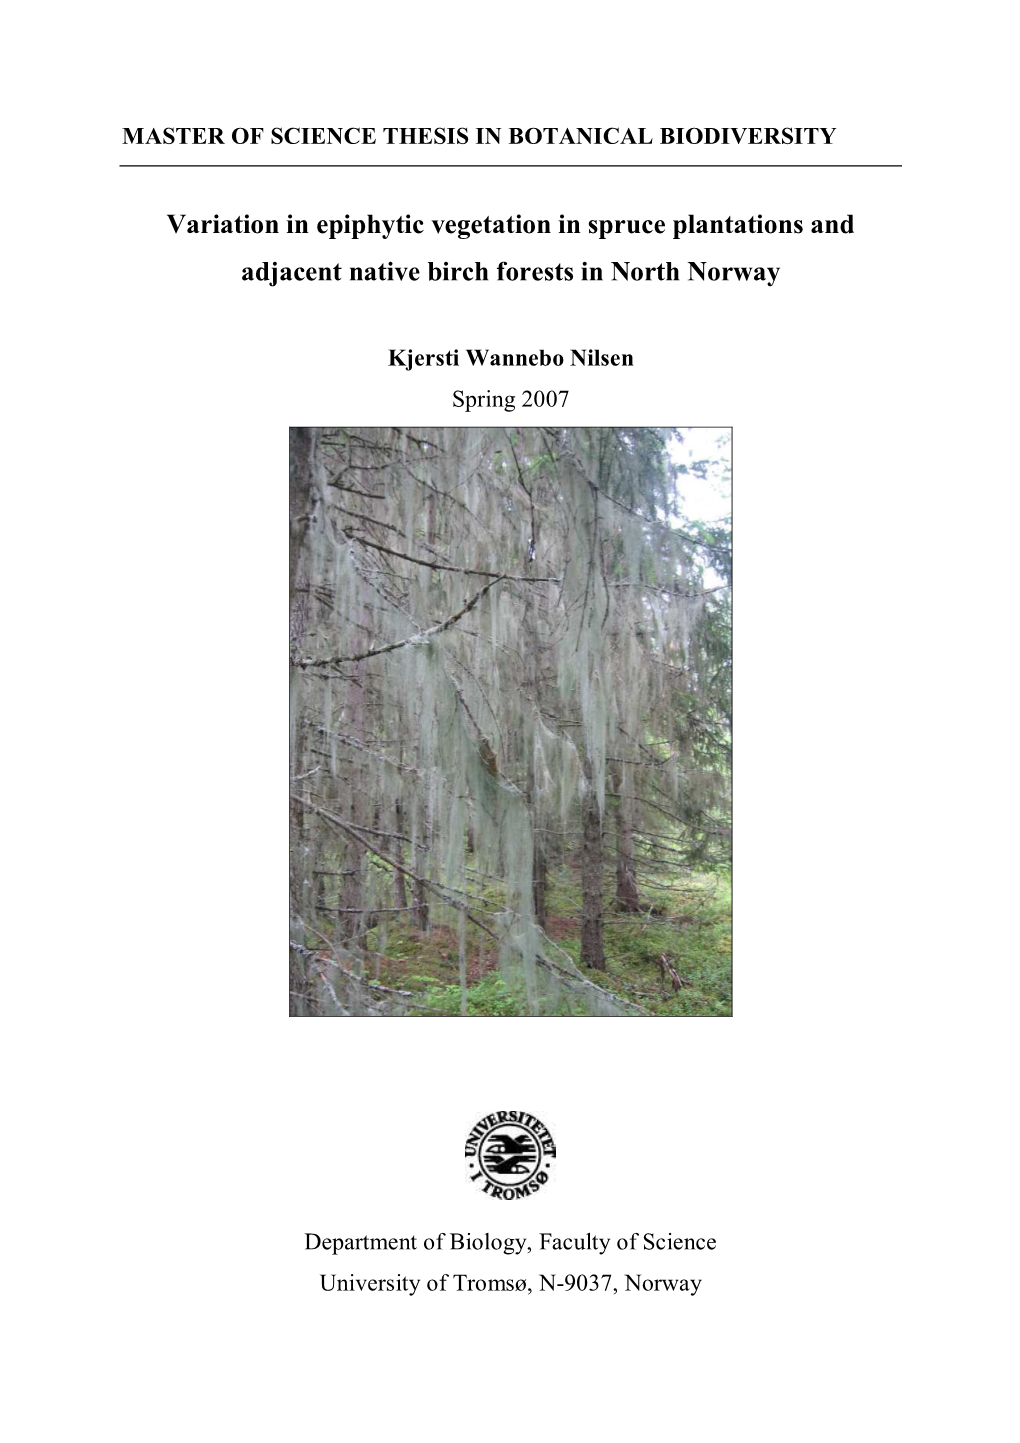 Variation in Epiphytic Vegetation in Spruce Plantations and Adjacent Native Birch Forests in North Norway